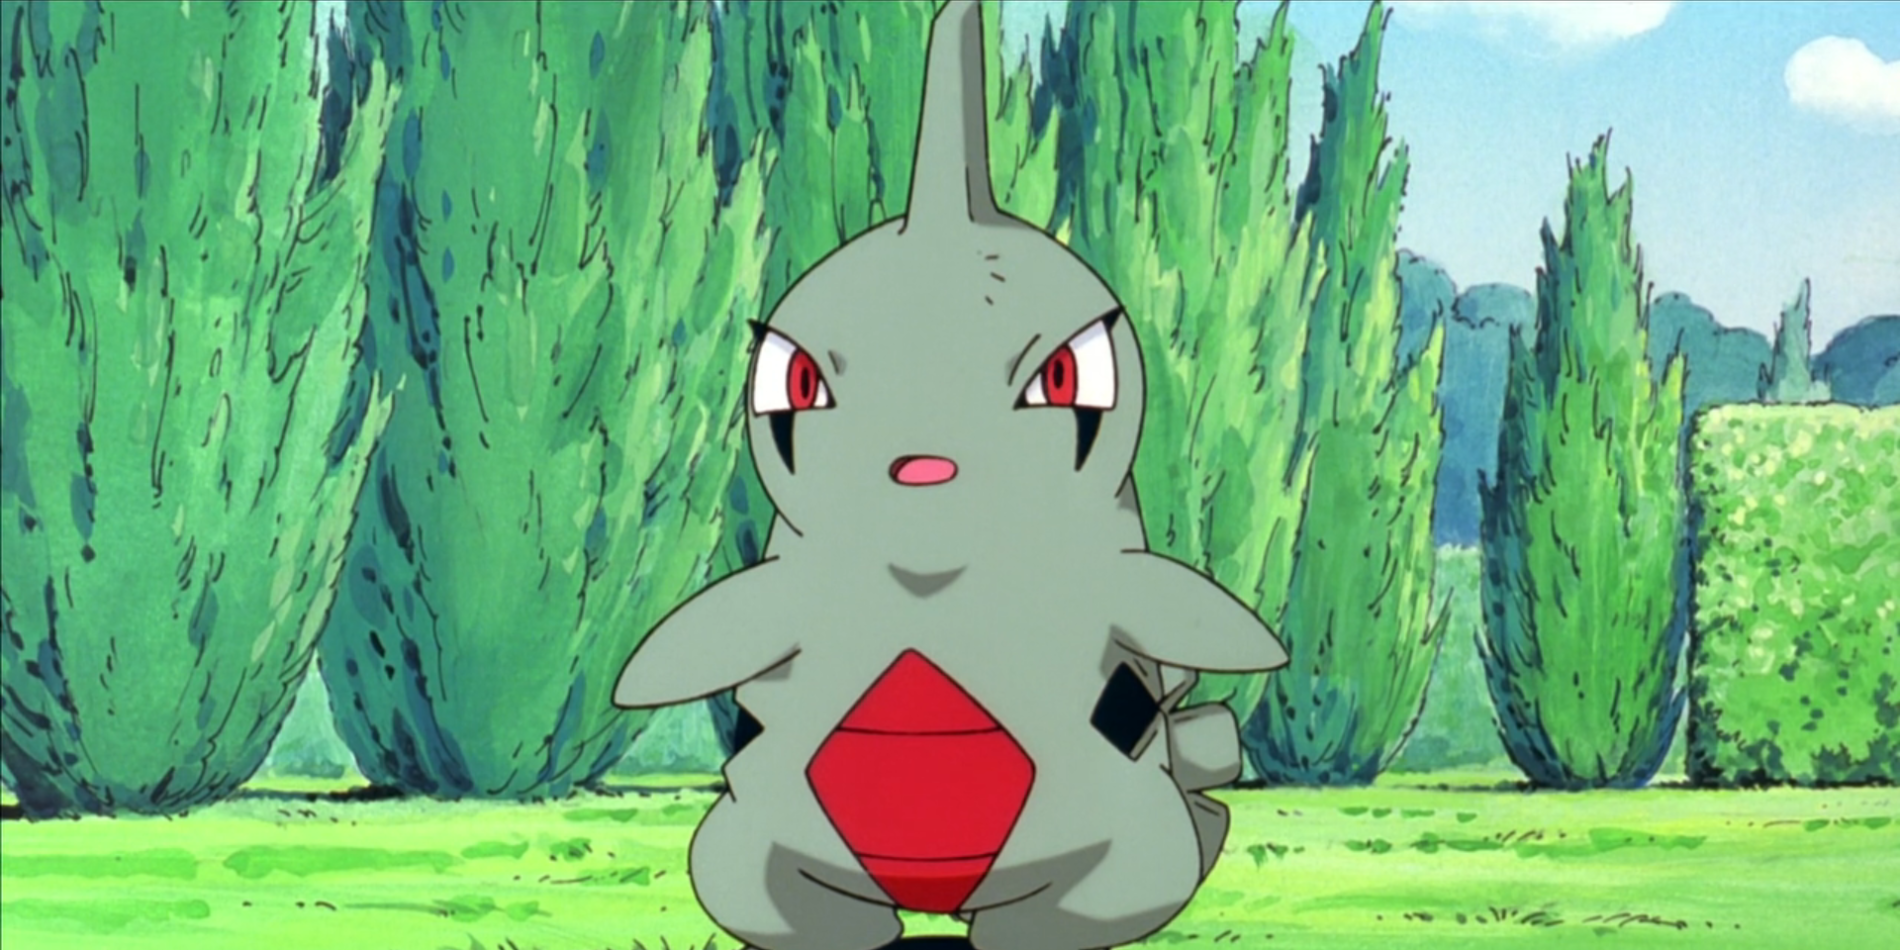 A baby Larvitar from the Pokemon anime